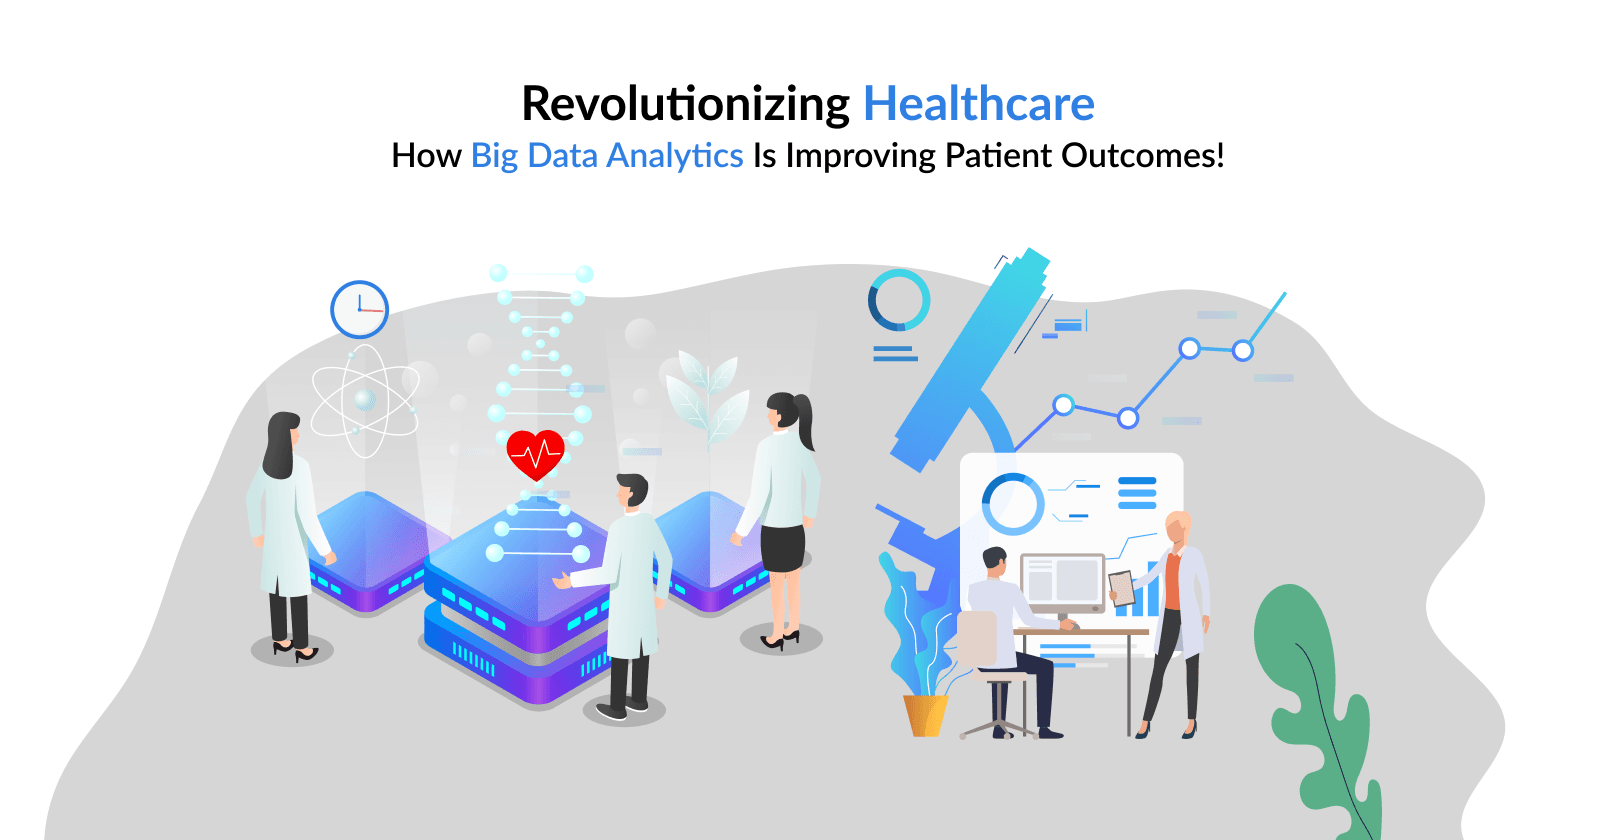 Revolutionizing Healthcare: How Big Data Analytics is Improving Patient Outcomes!